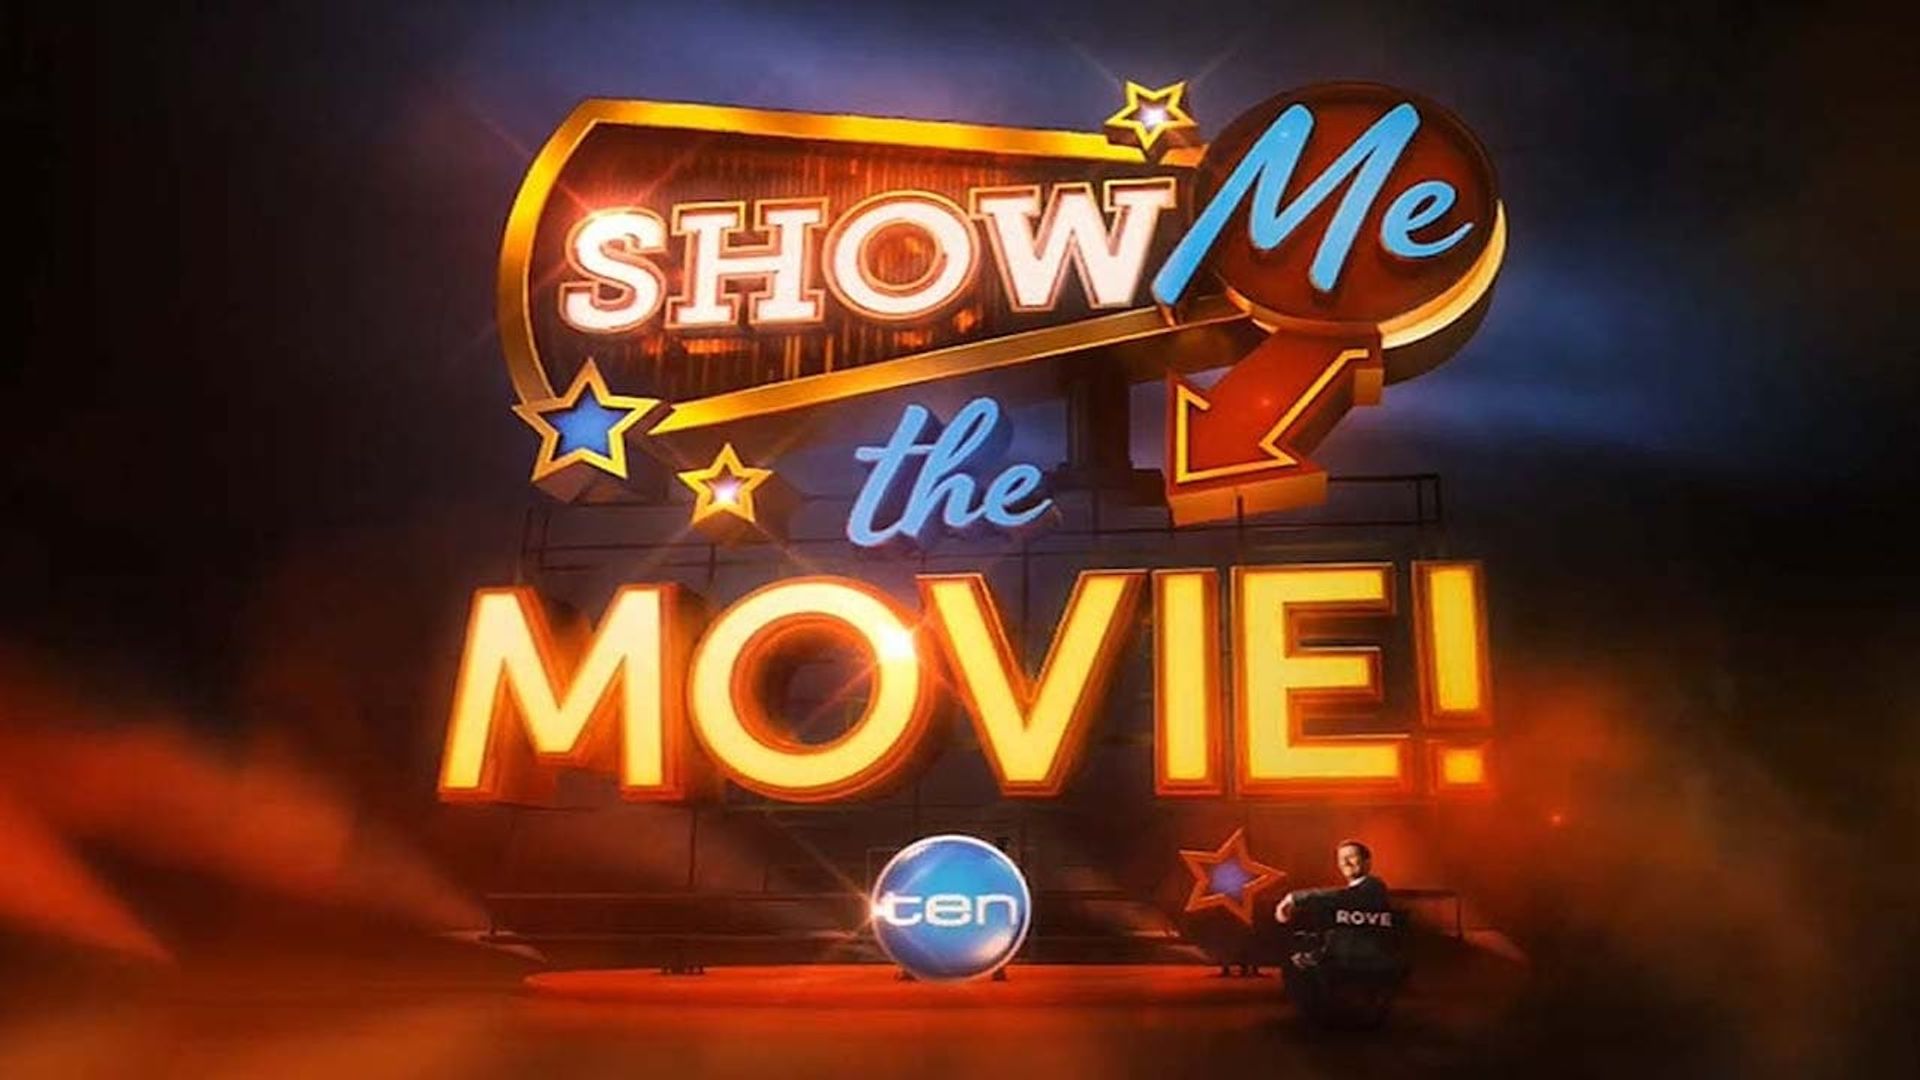 Show Me the Movie! background